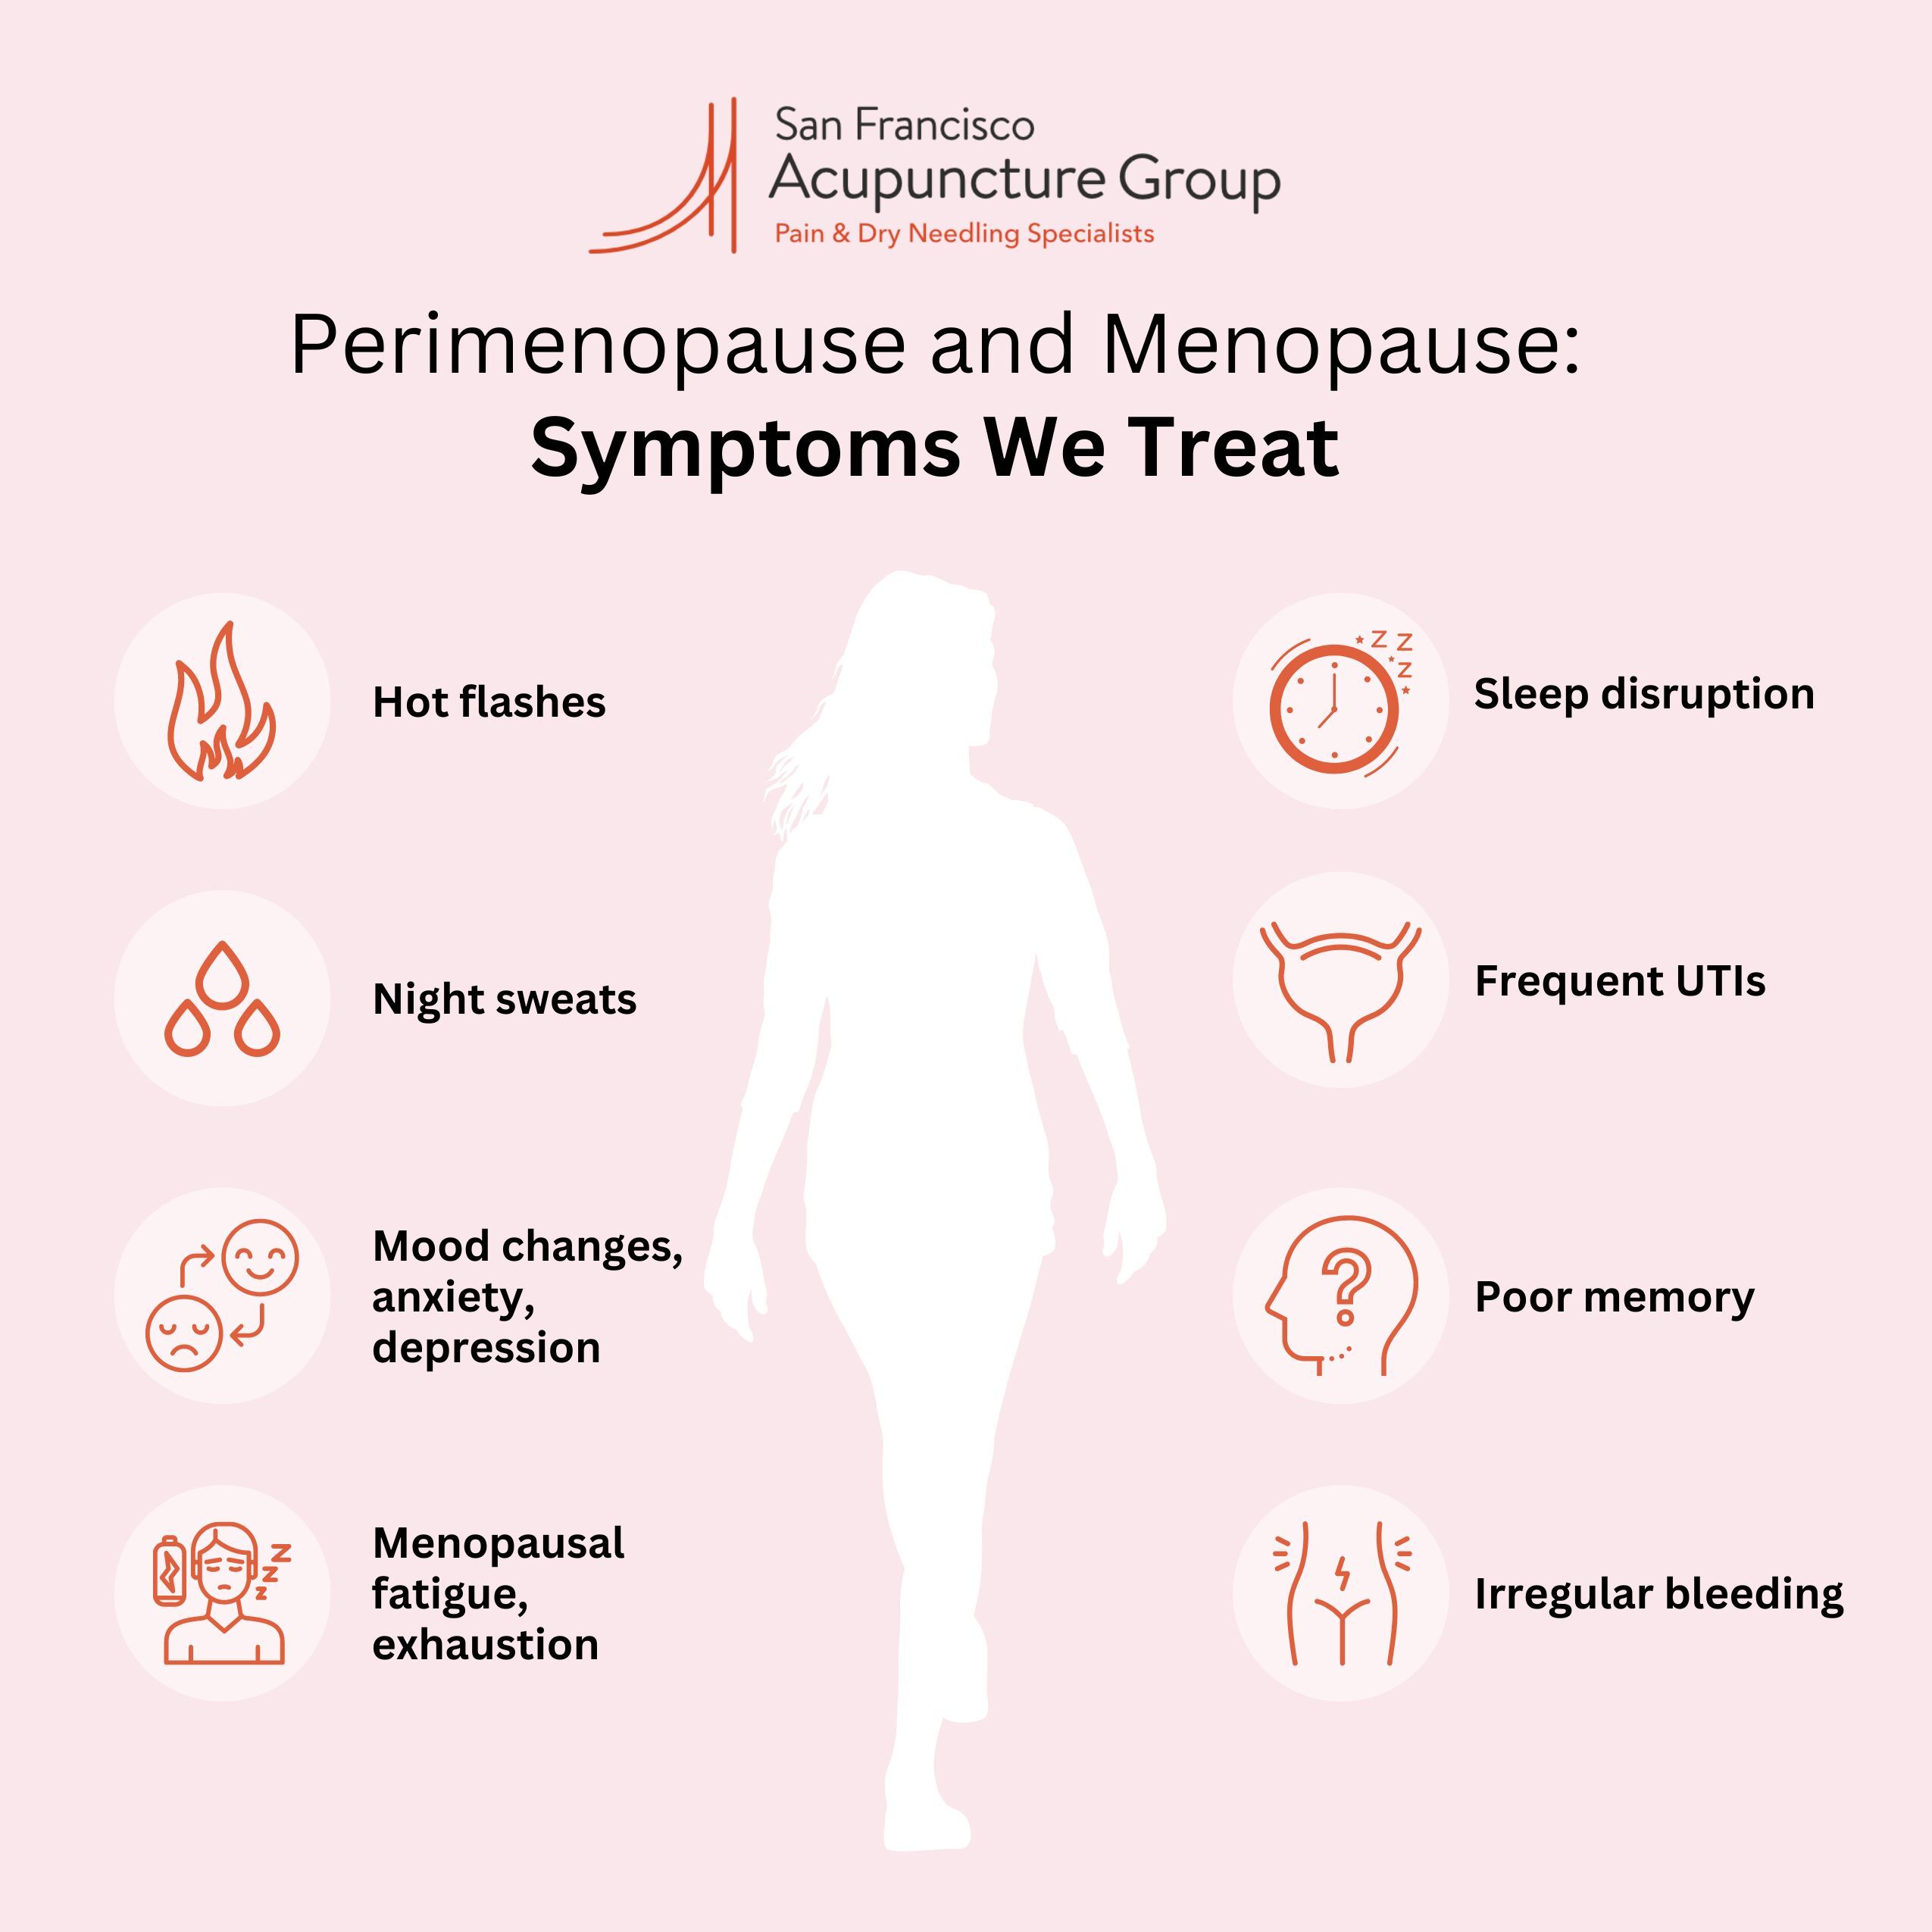 Infographic depicting list of Perimenopause and Menopause symptoms we treat: hot flashes; night sweats; mood changes, anxiety, depression; menopausal fatigue / exhaustion; sleep disruption; frequent UTIs; poor memory; irregular bleeding.